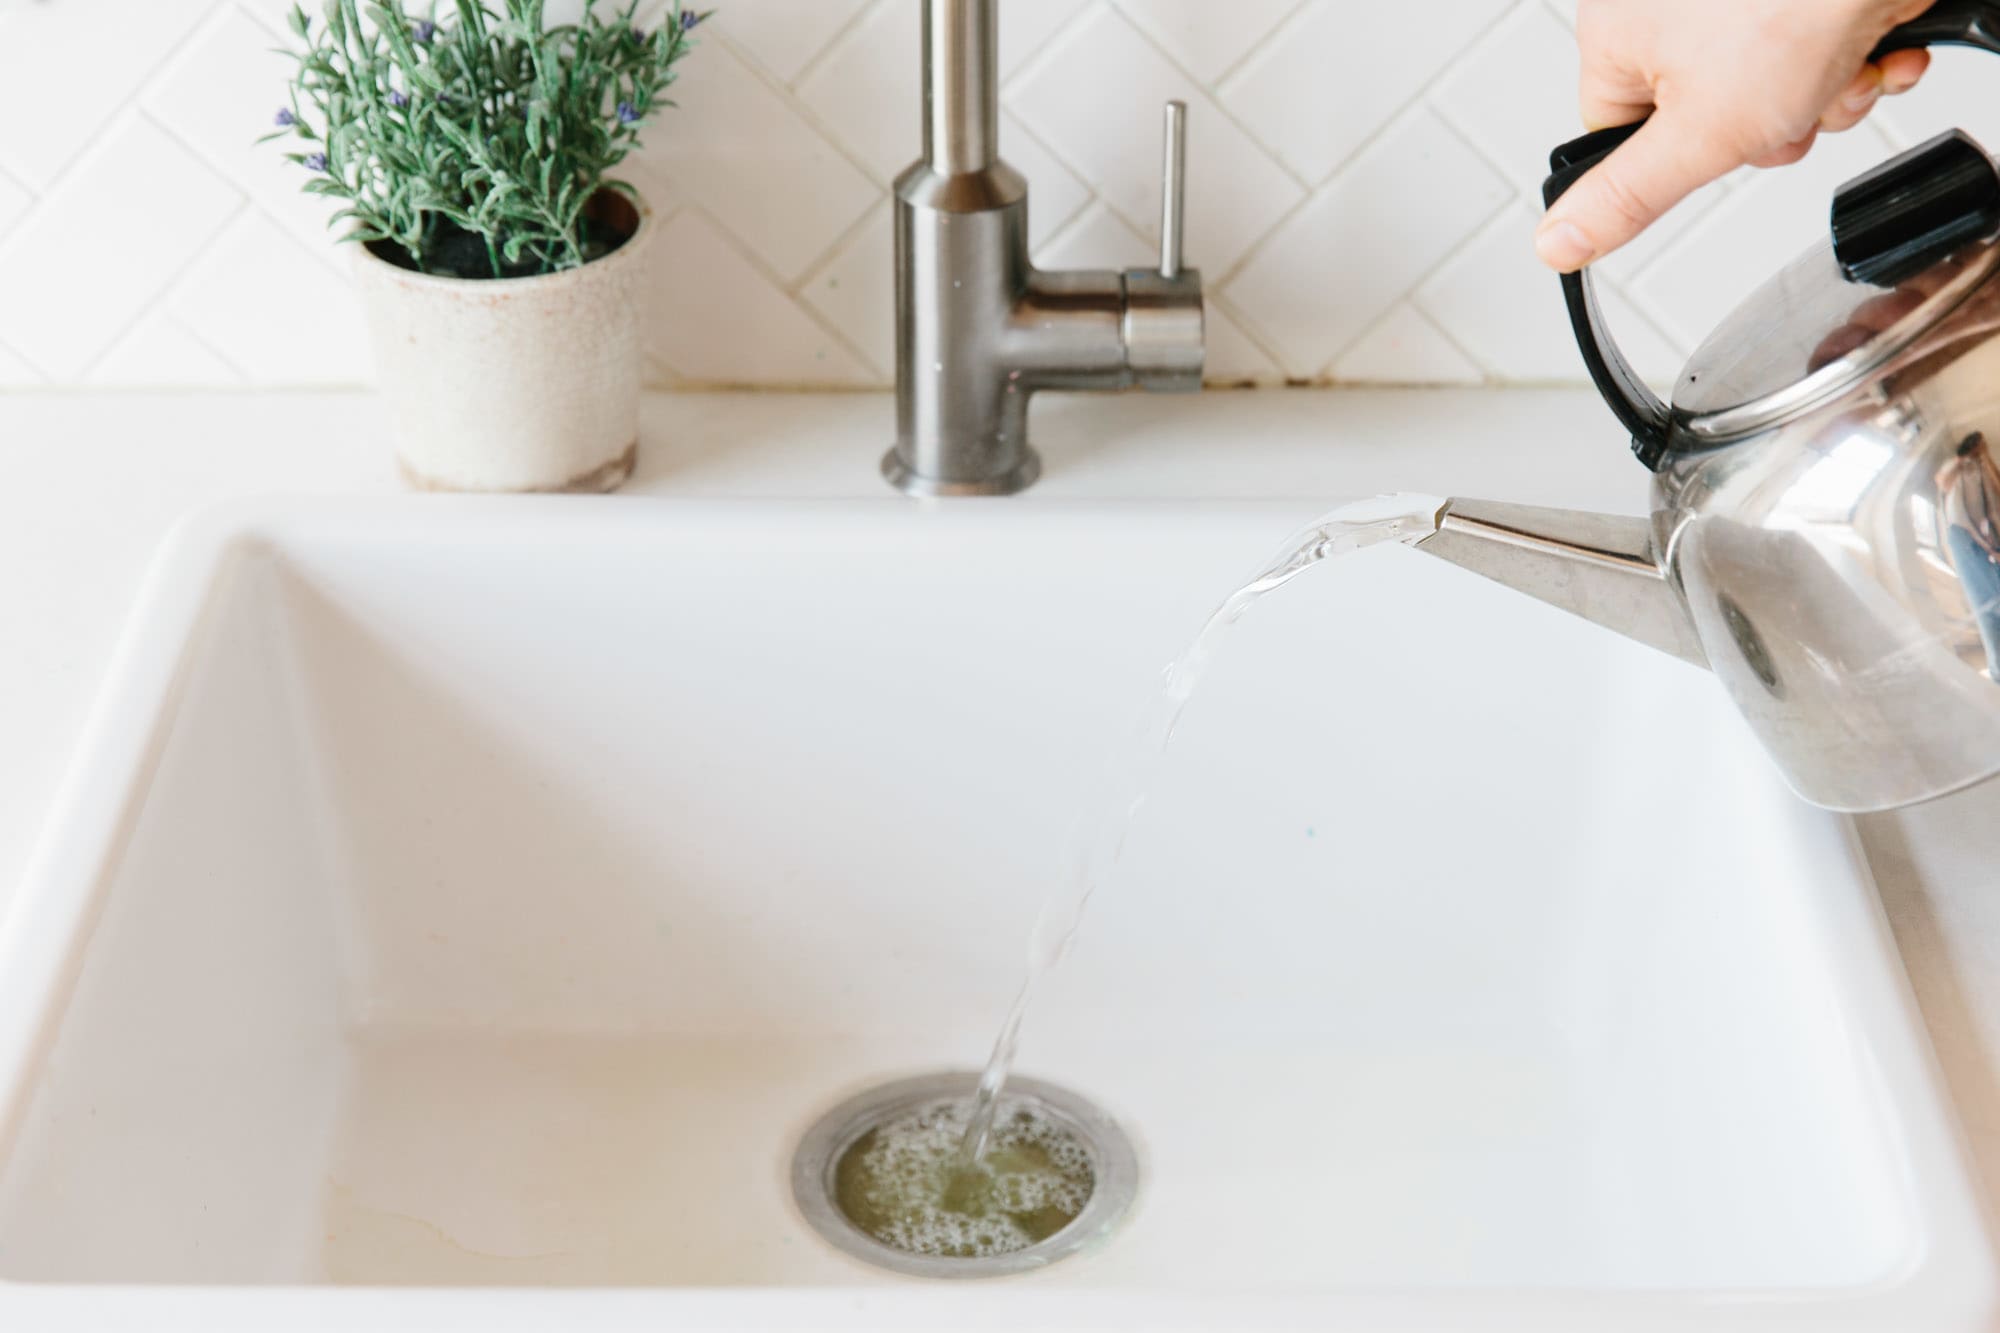 How To Make Your Own Drain Cleaner | Kitchn